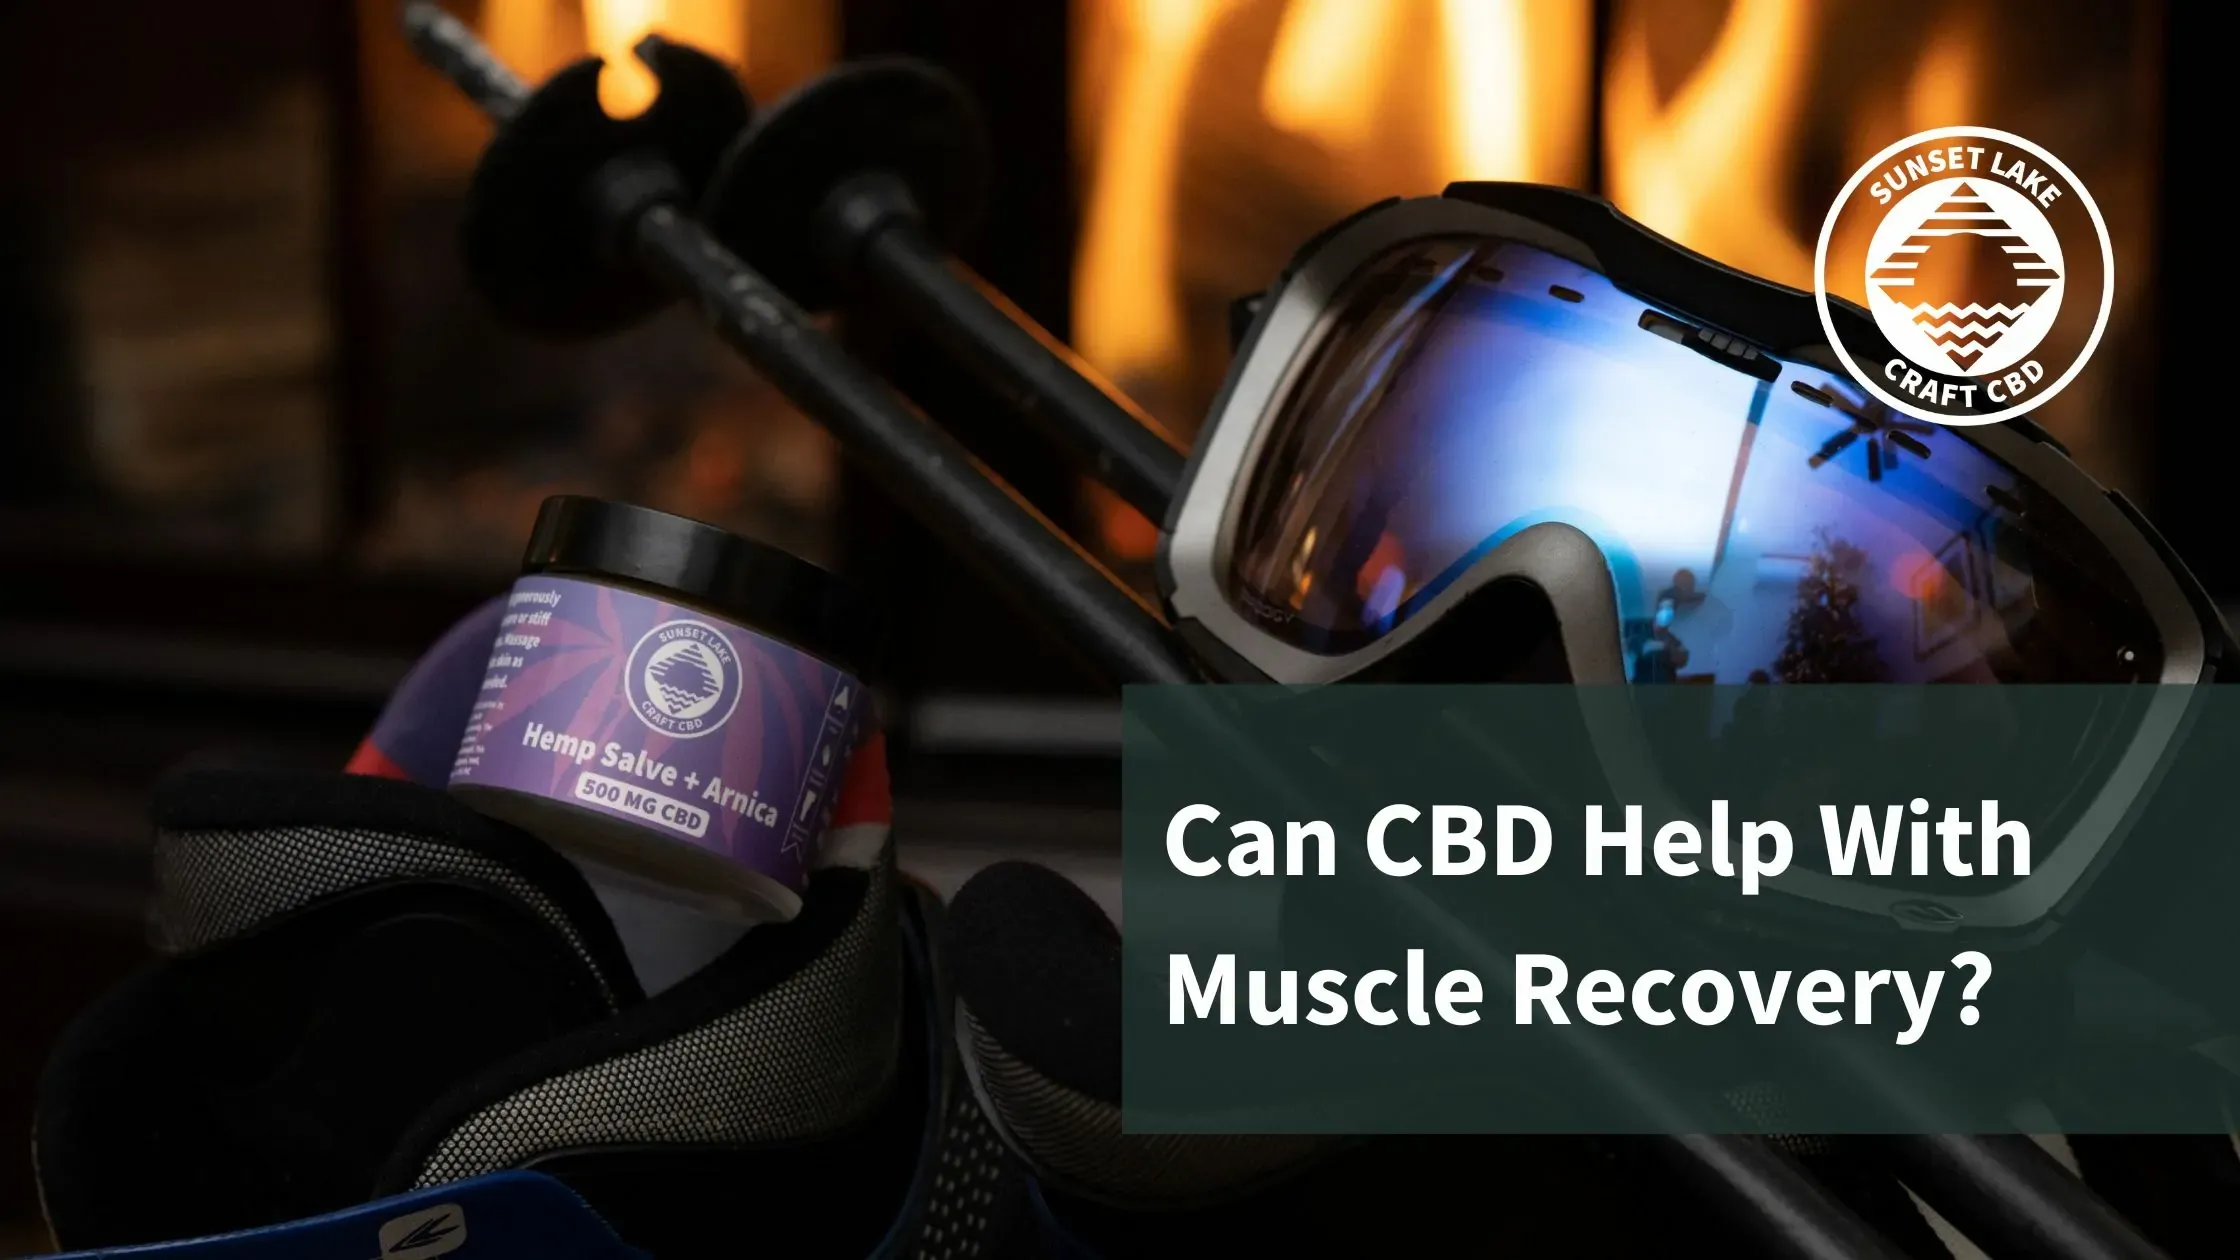 A jar of Sunset Lake CBD salve next to ski goggles. The text says "Can CBD Help With Muscle Recovery?"